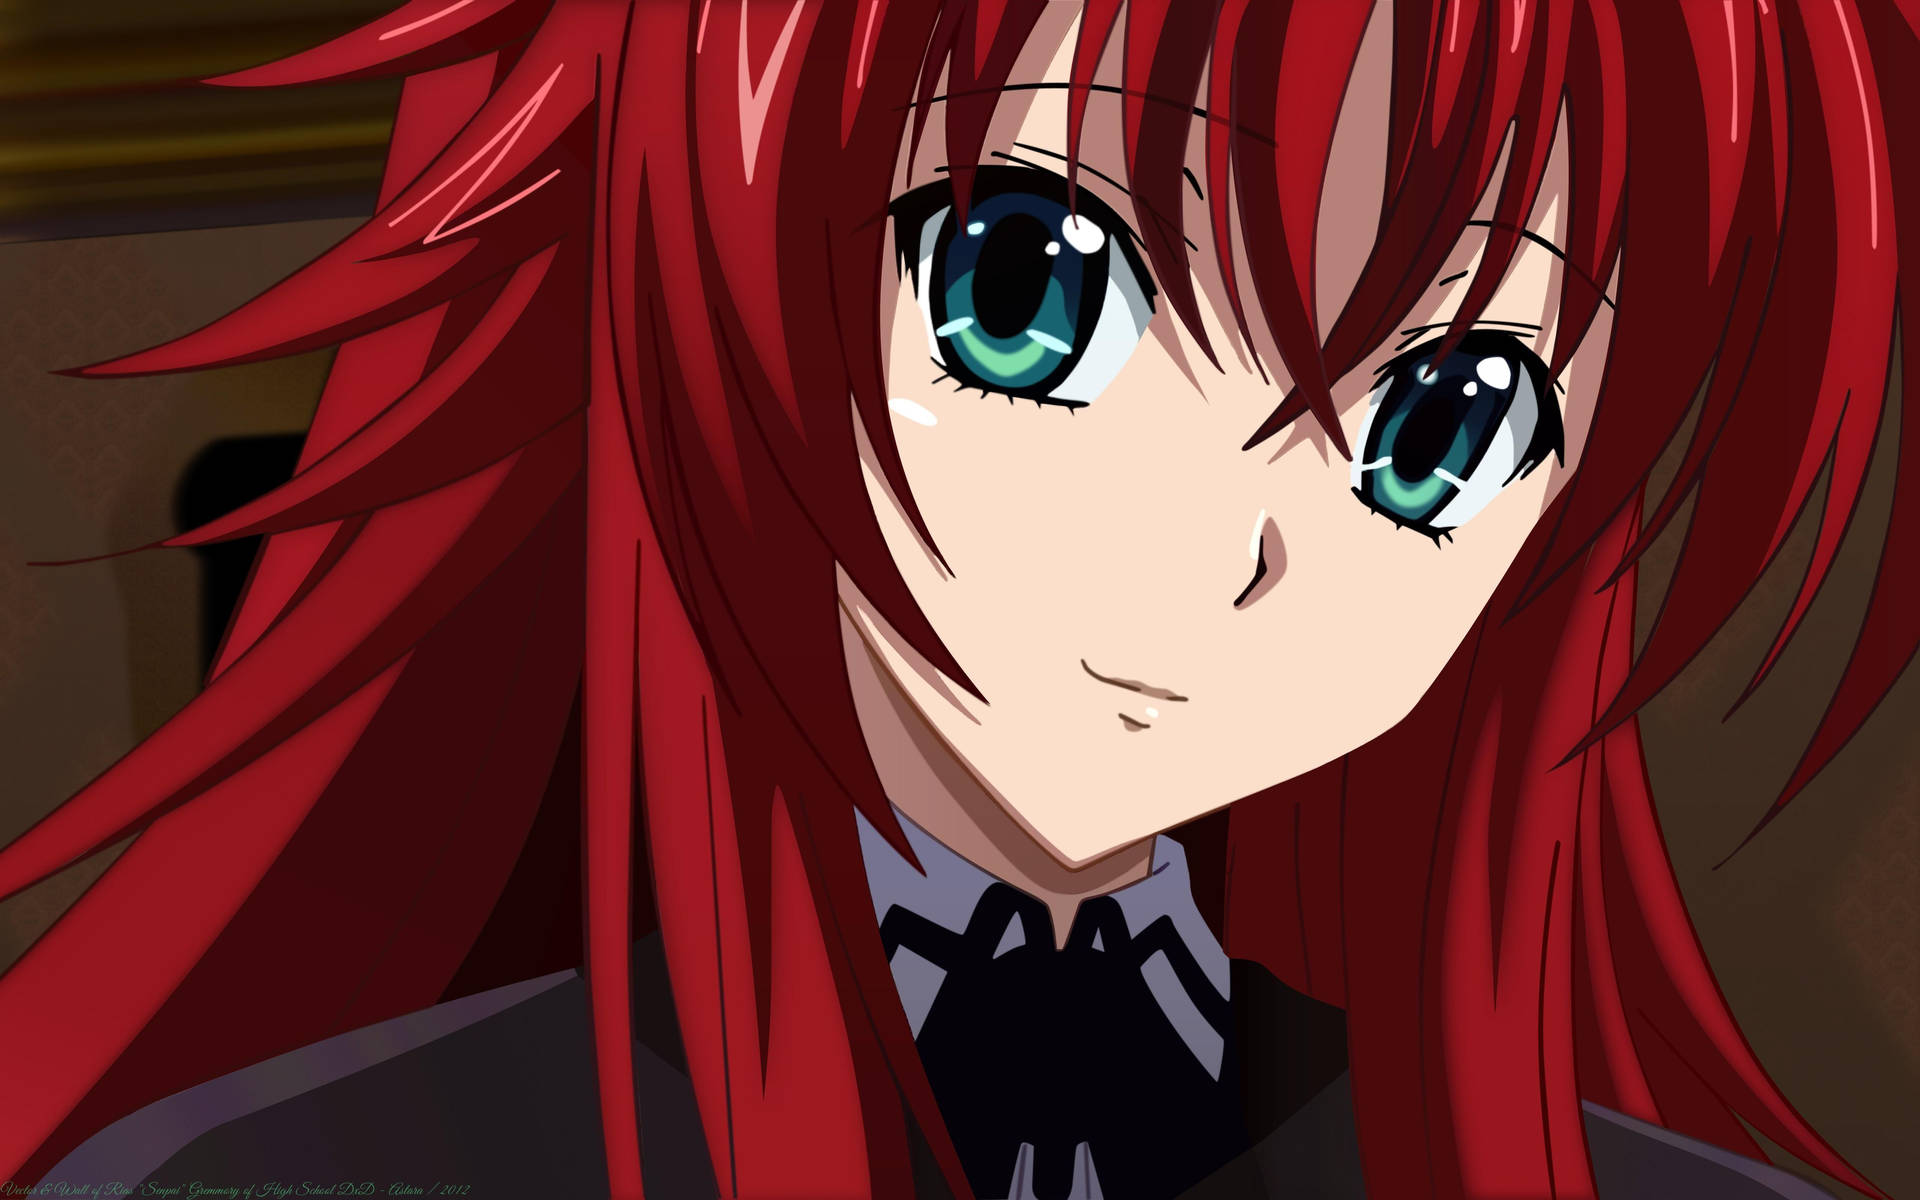 Follow Rias Gremory On Her Quest In Highschool Dxd. Background